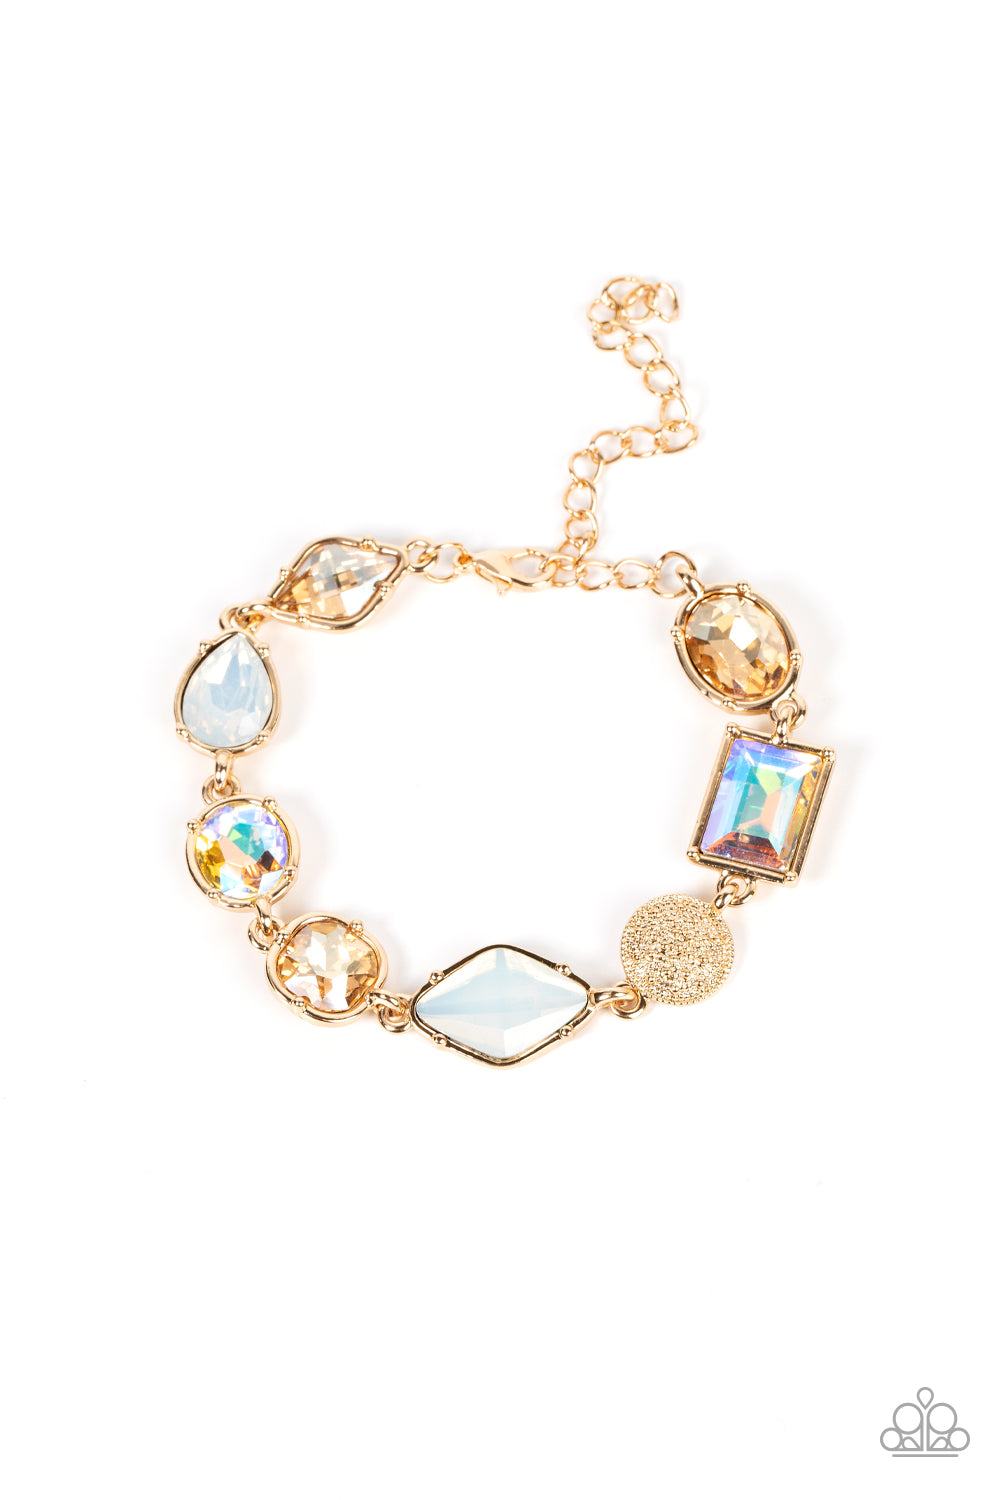 Encased in pronged gold fittings, a mismatched collection of golden, iridescent, and opal rhinestones delicately links with a studded gold frame around the wrist